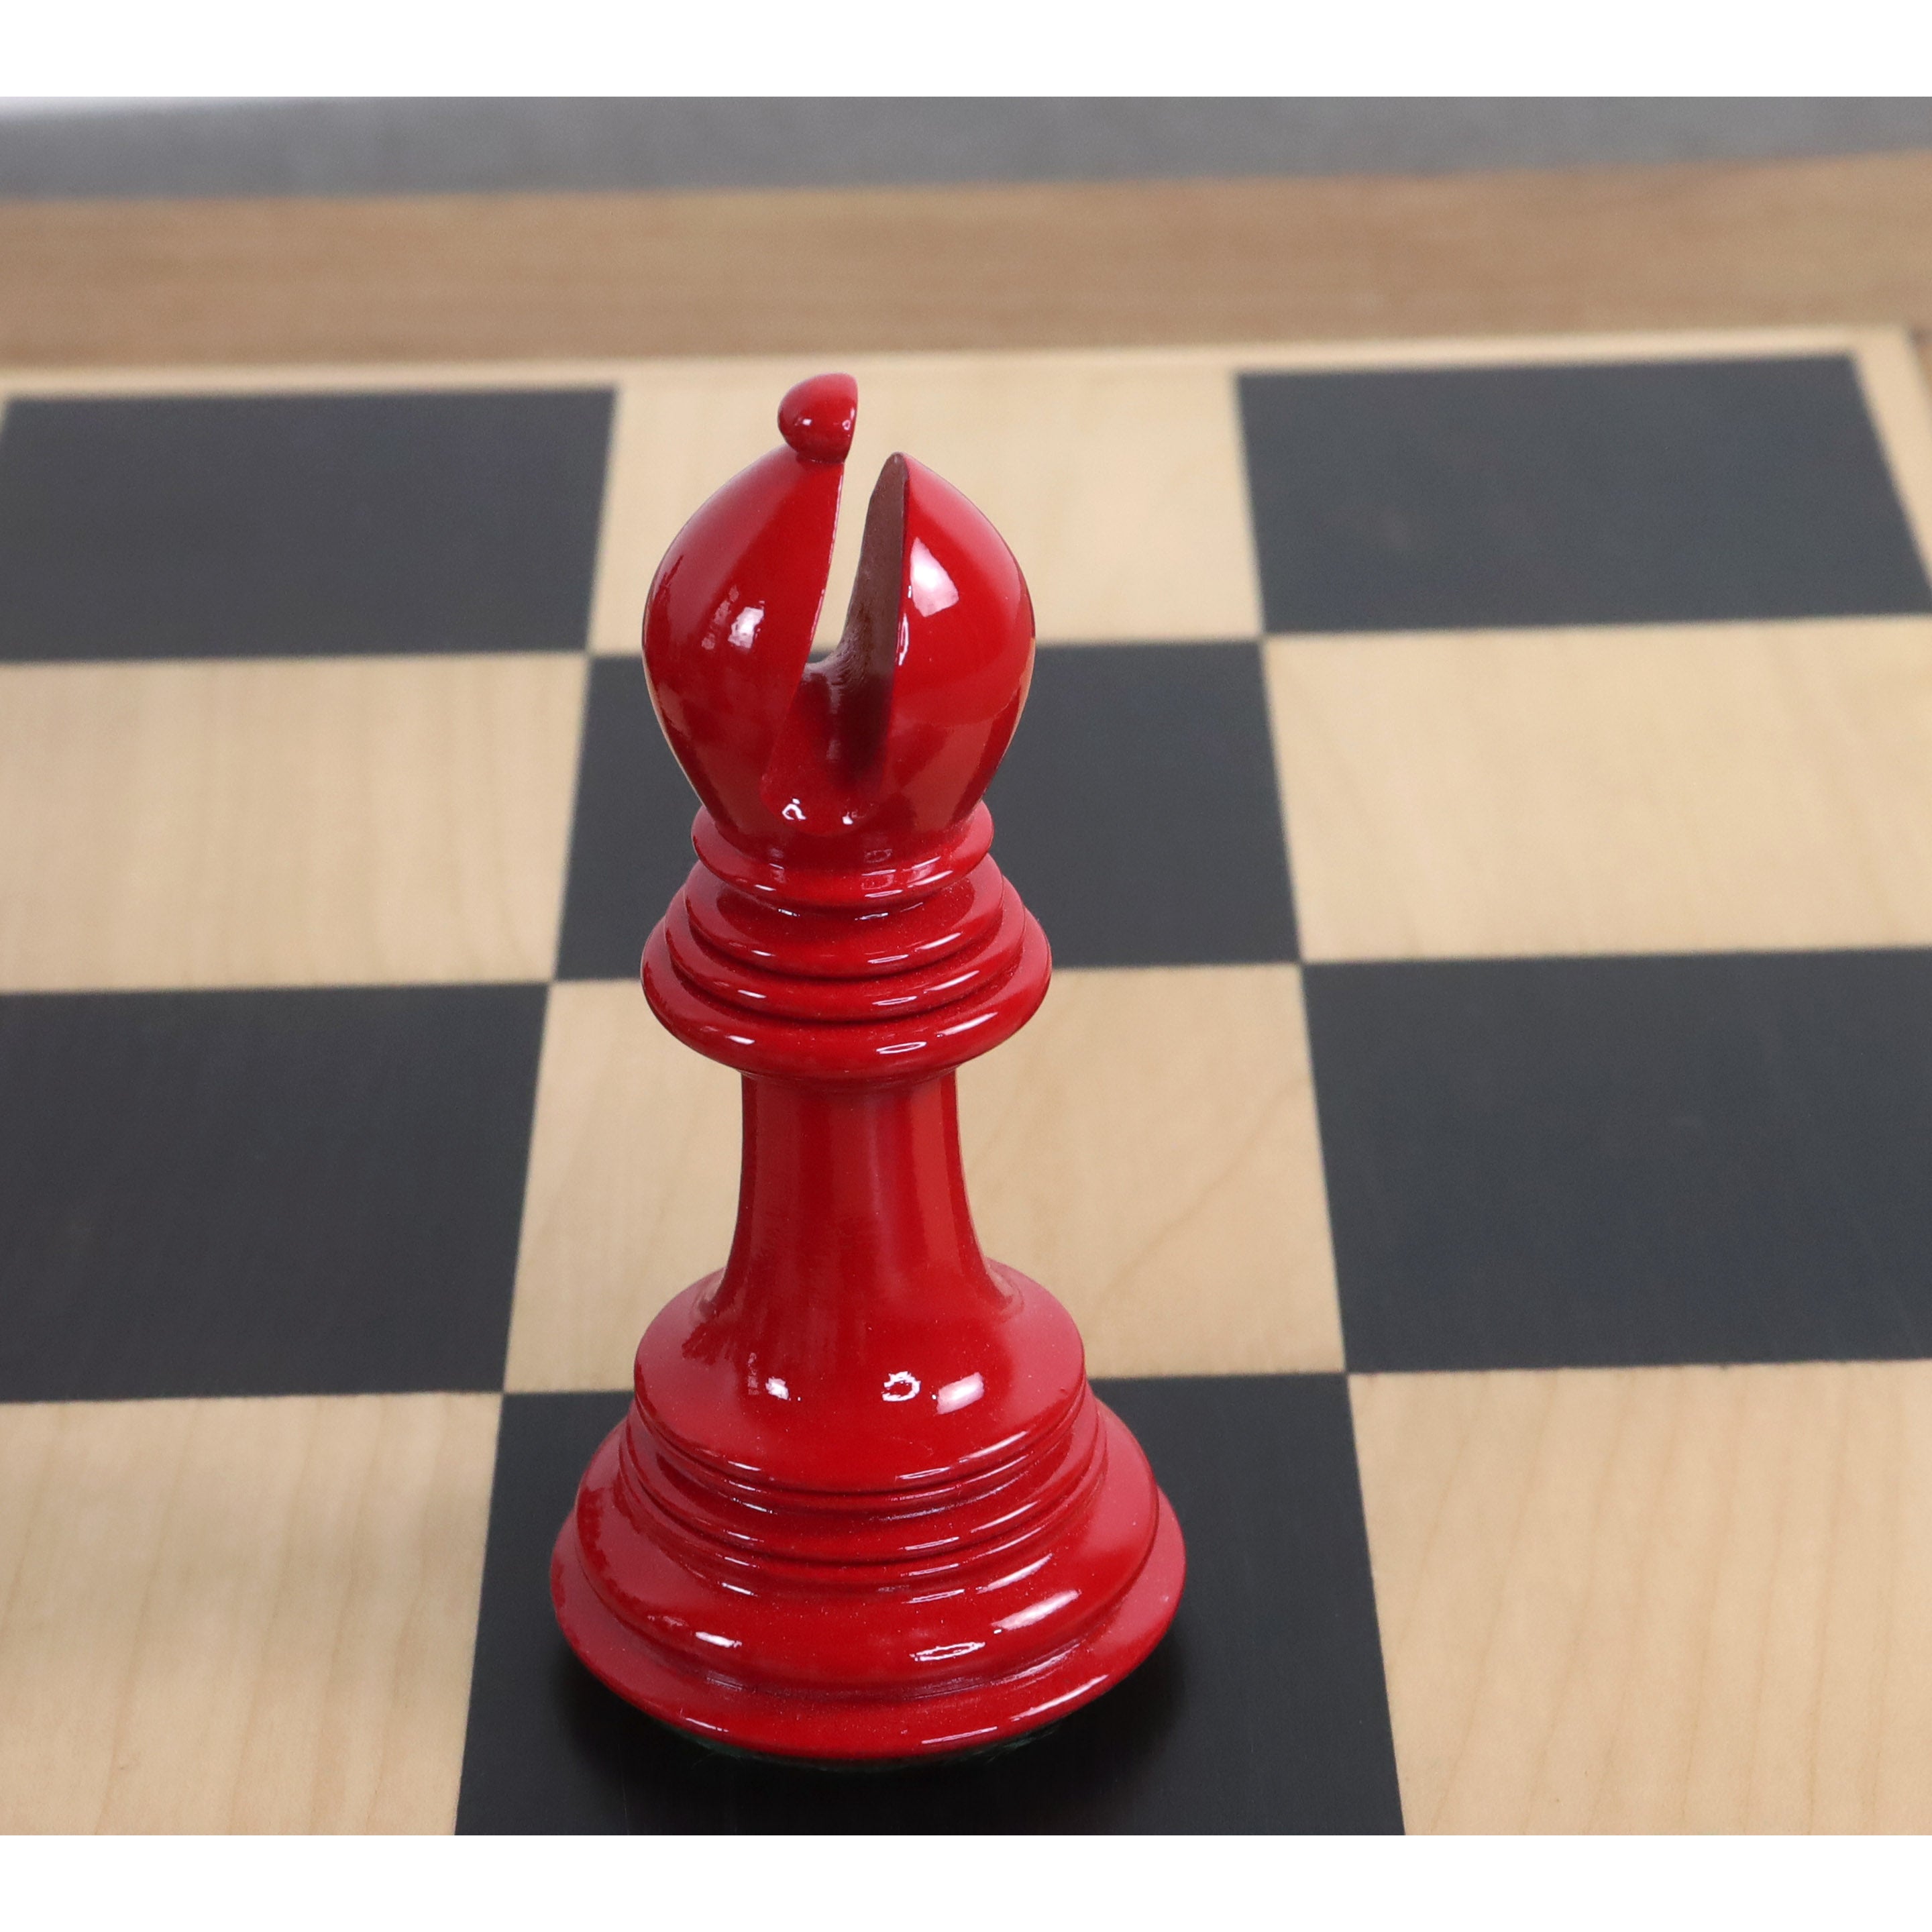 4.6" Mogul Staunton Luxury Chess Set- Chess Pieces Only - White & Red Lacquered Boxwood